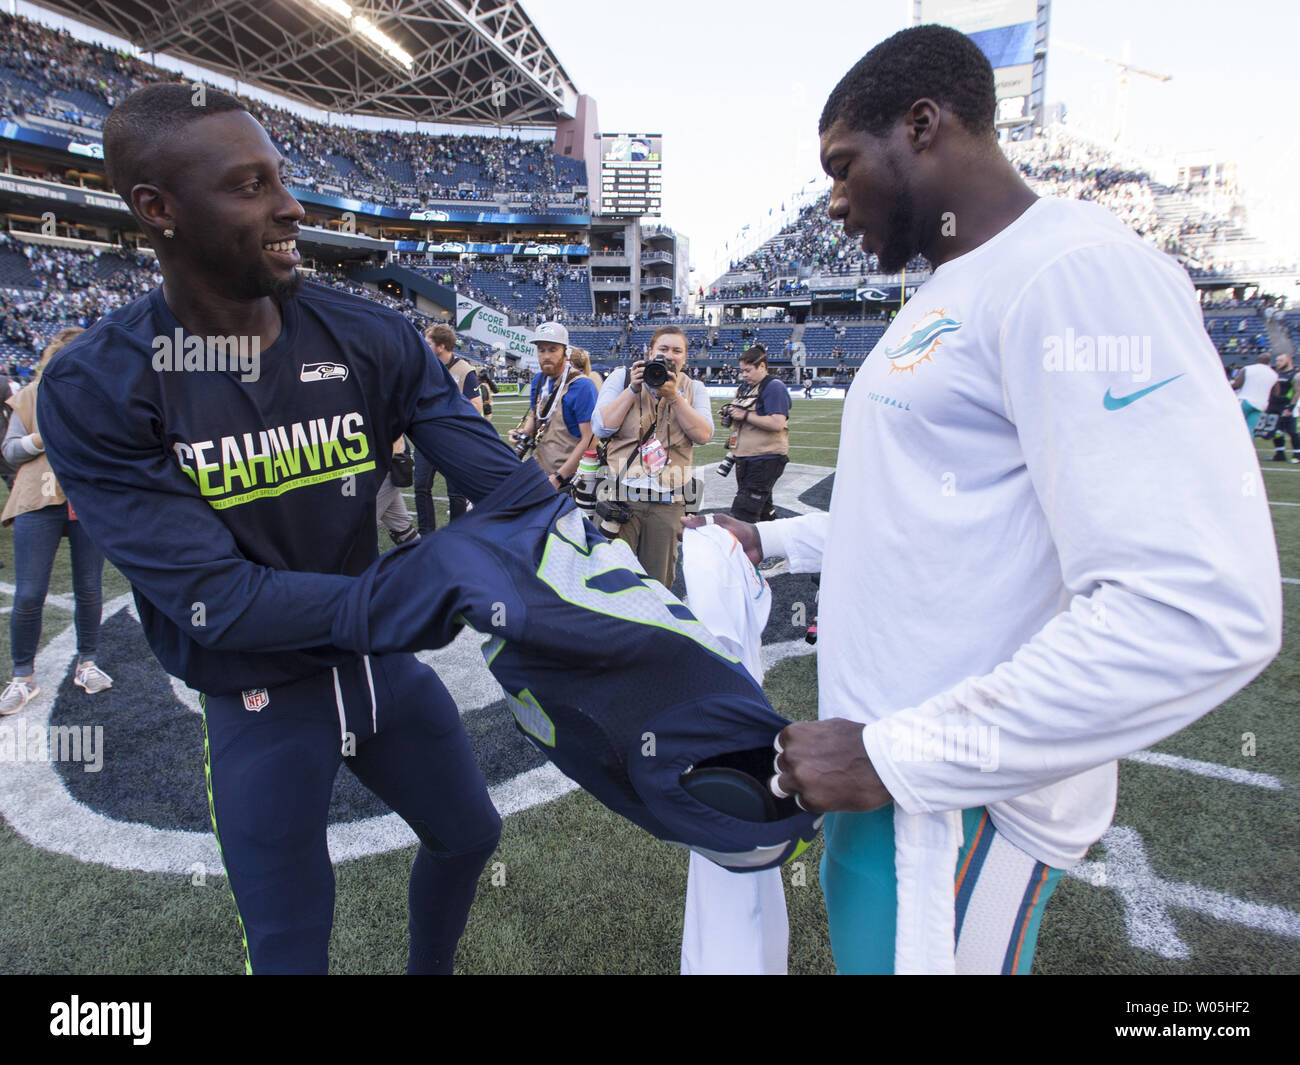 Seattle Seahawks cornerback Jeremy Lane (20) swaps jerseys with former Seahawks teammate Miami Dolphins defensive back Byron Maxwell (41) after the game at CenturyLink Field in Seattle, Washington on September 11, 2016.  Seahawks came from behind to beat the Dolphins 12-10.   Photo by Jim Bryant/UPI Stock Photo